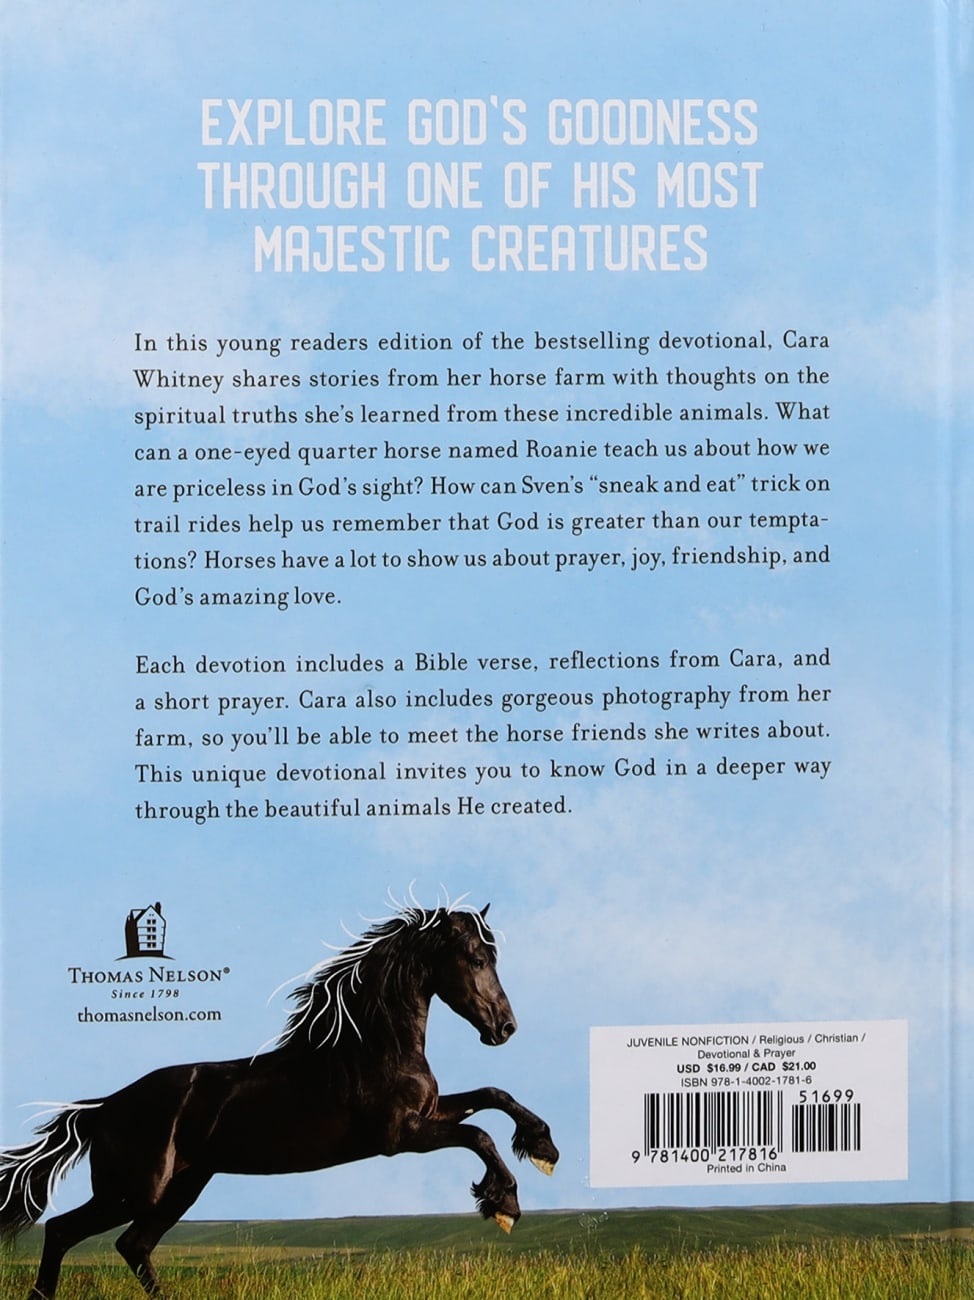 Unbridled Faith Devotions For Young Readers Hardback